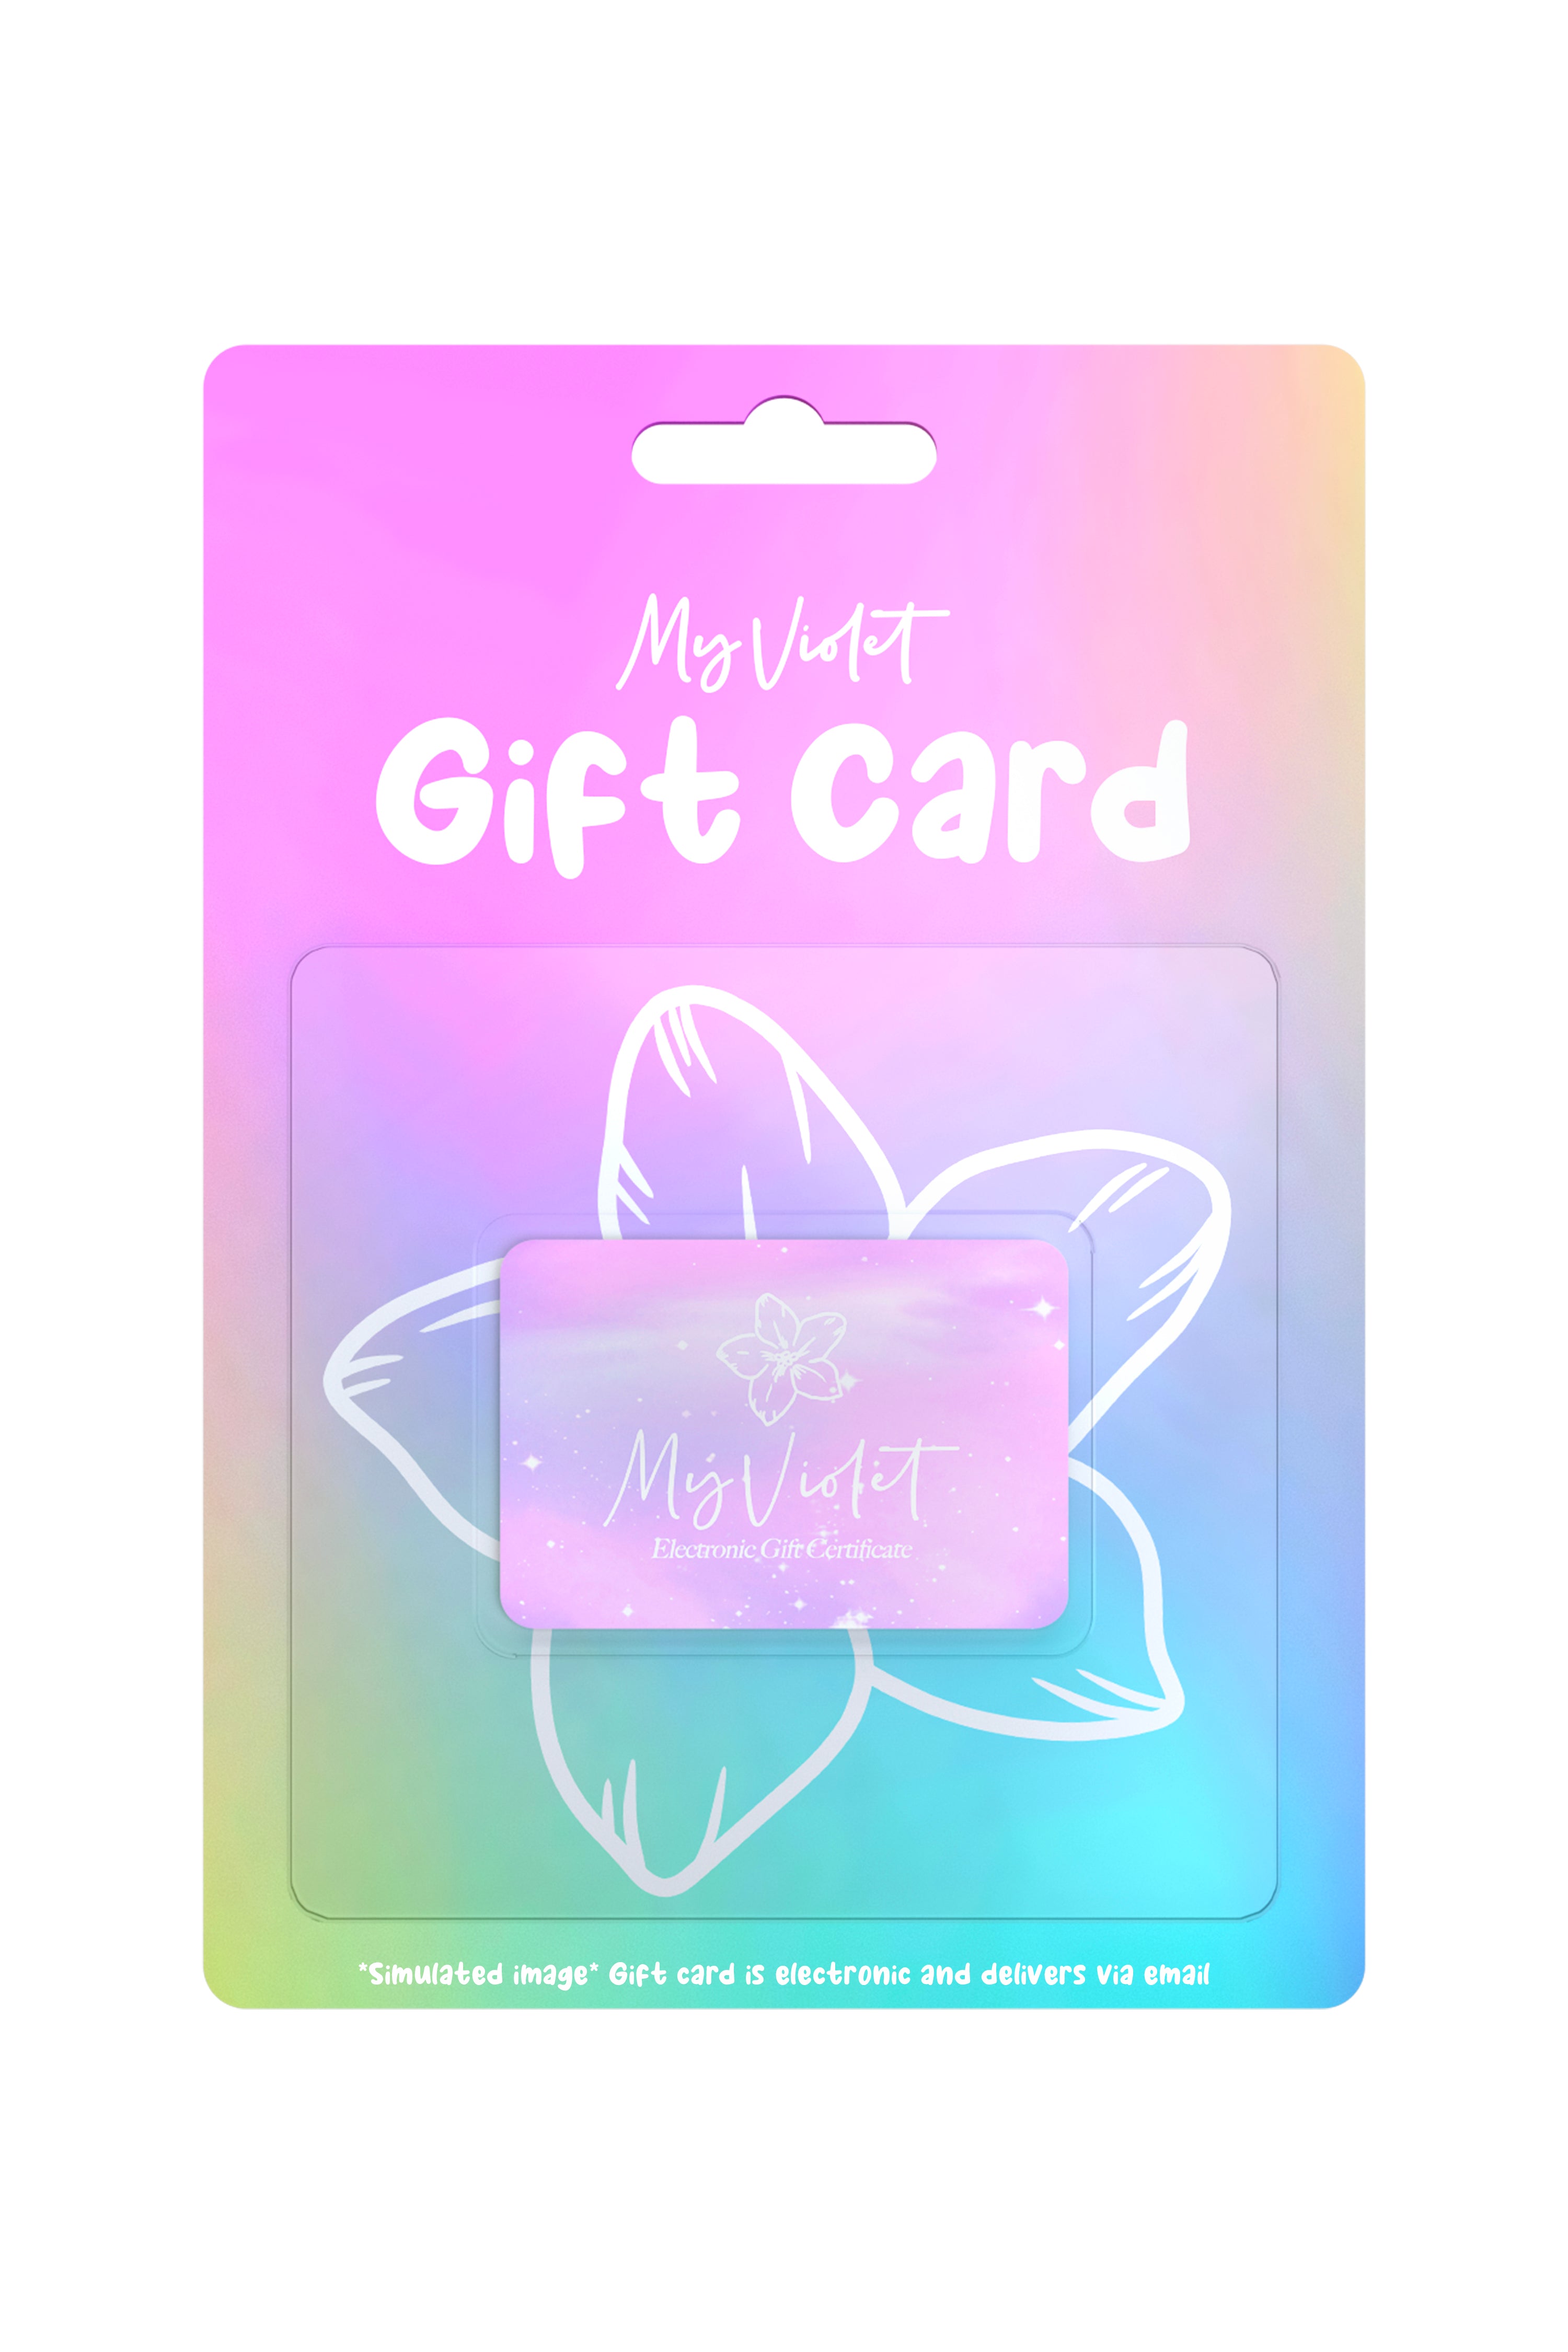 My Violet E-Gift Card